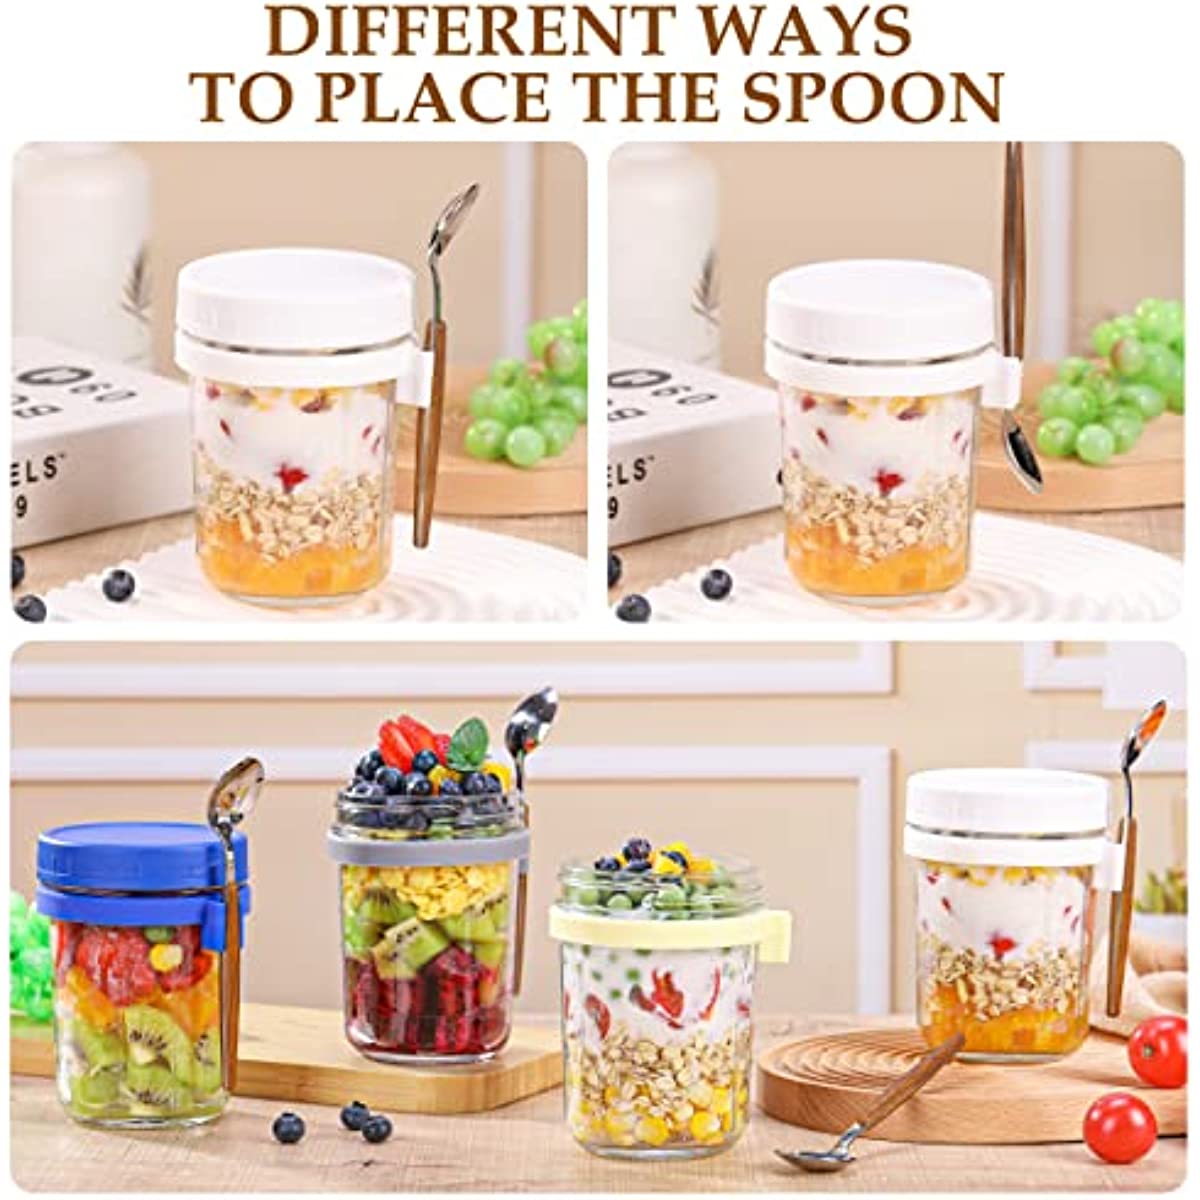 1 pc,350ml Overnight Oats Containers with Lids and Spoon, 16 Oz Glass  Container to Go for Chia Pudding Yogurt Salad Cereal Meal Prep